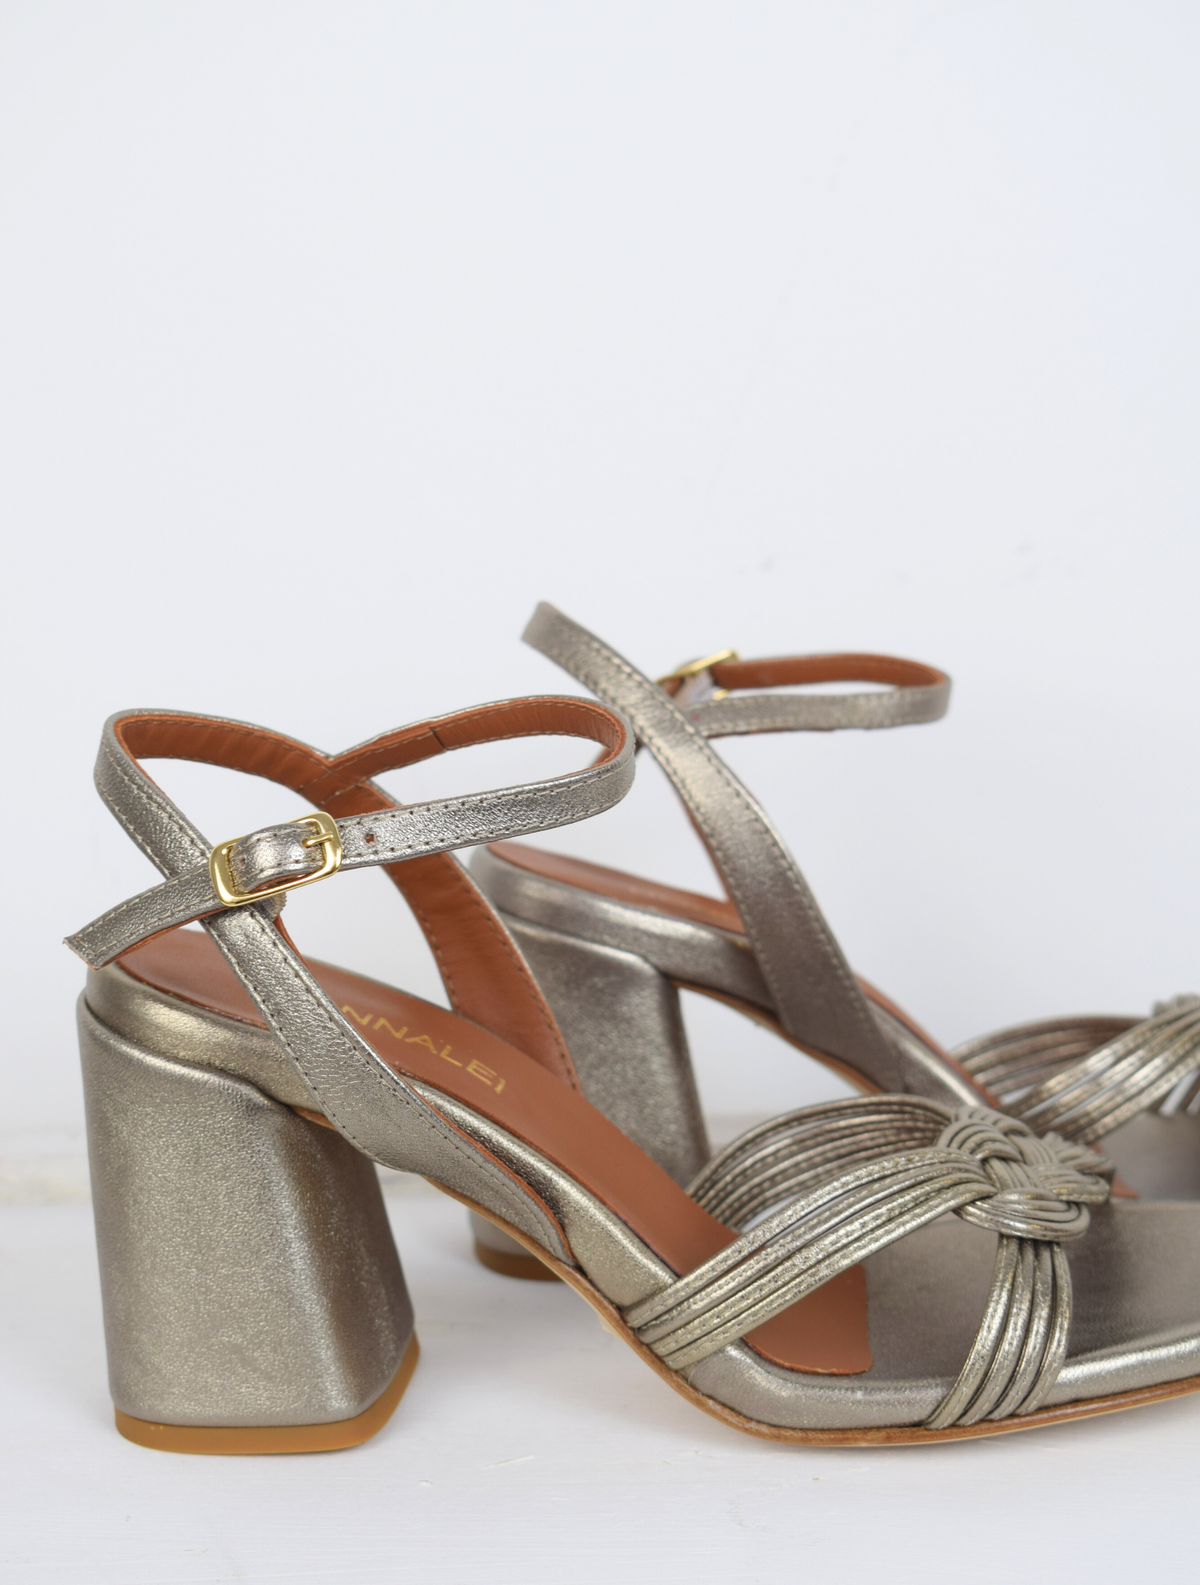 Pewter strappy sandal with block heel